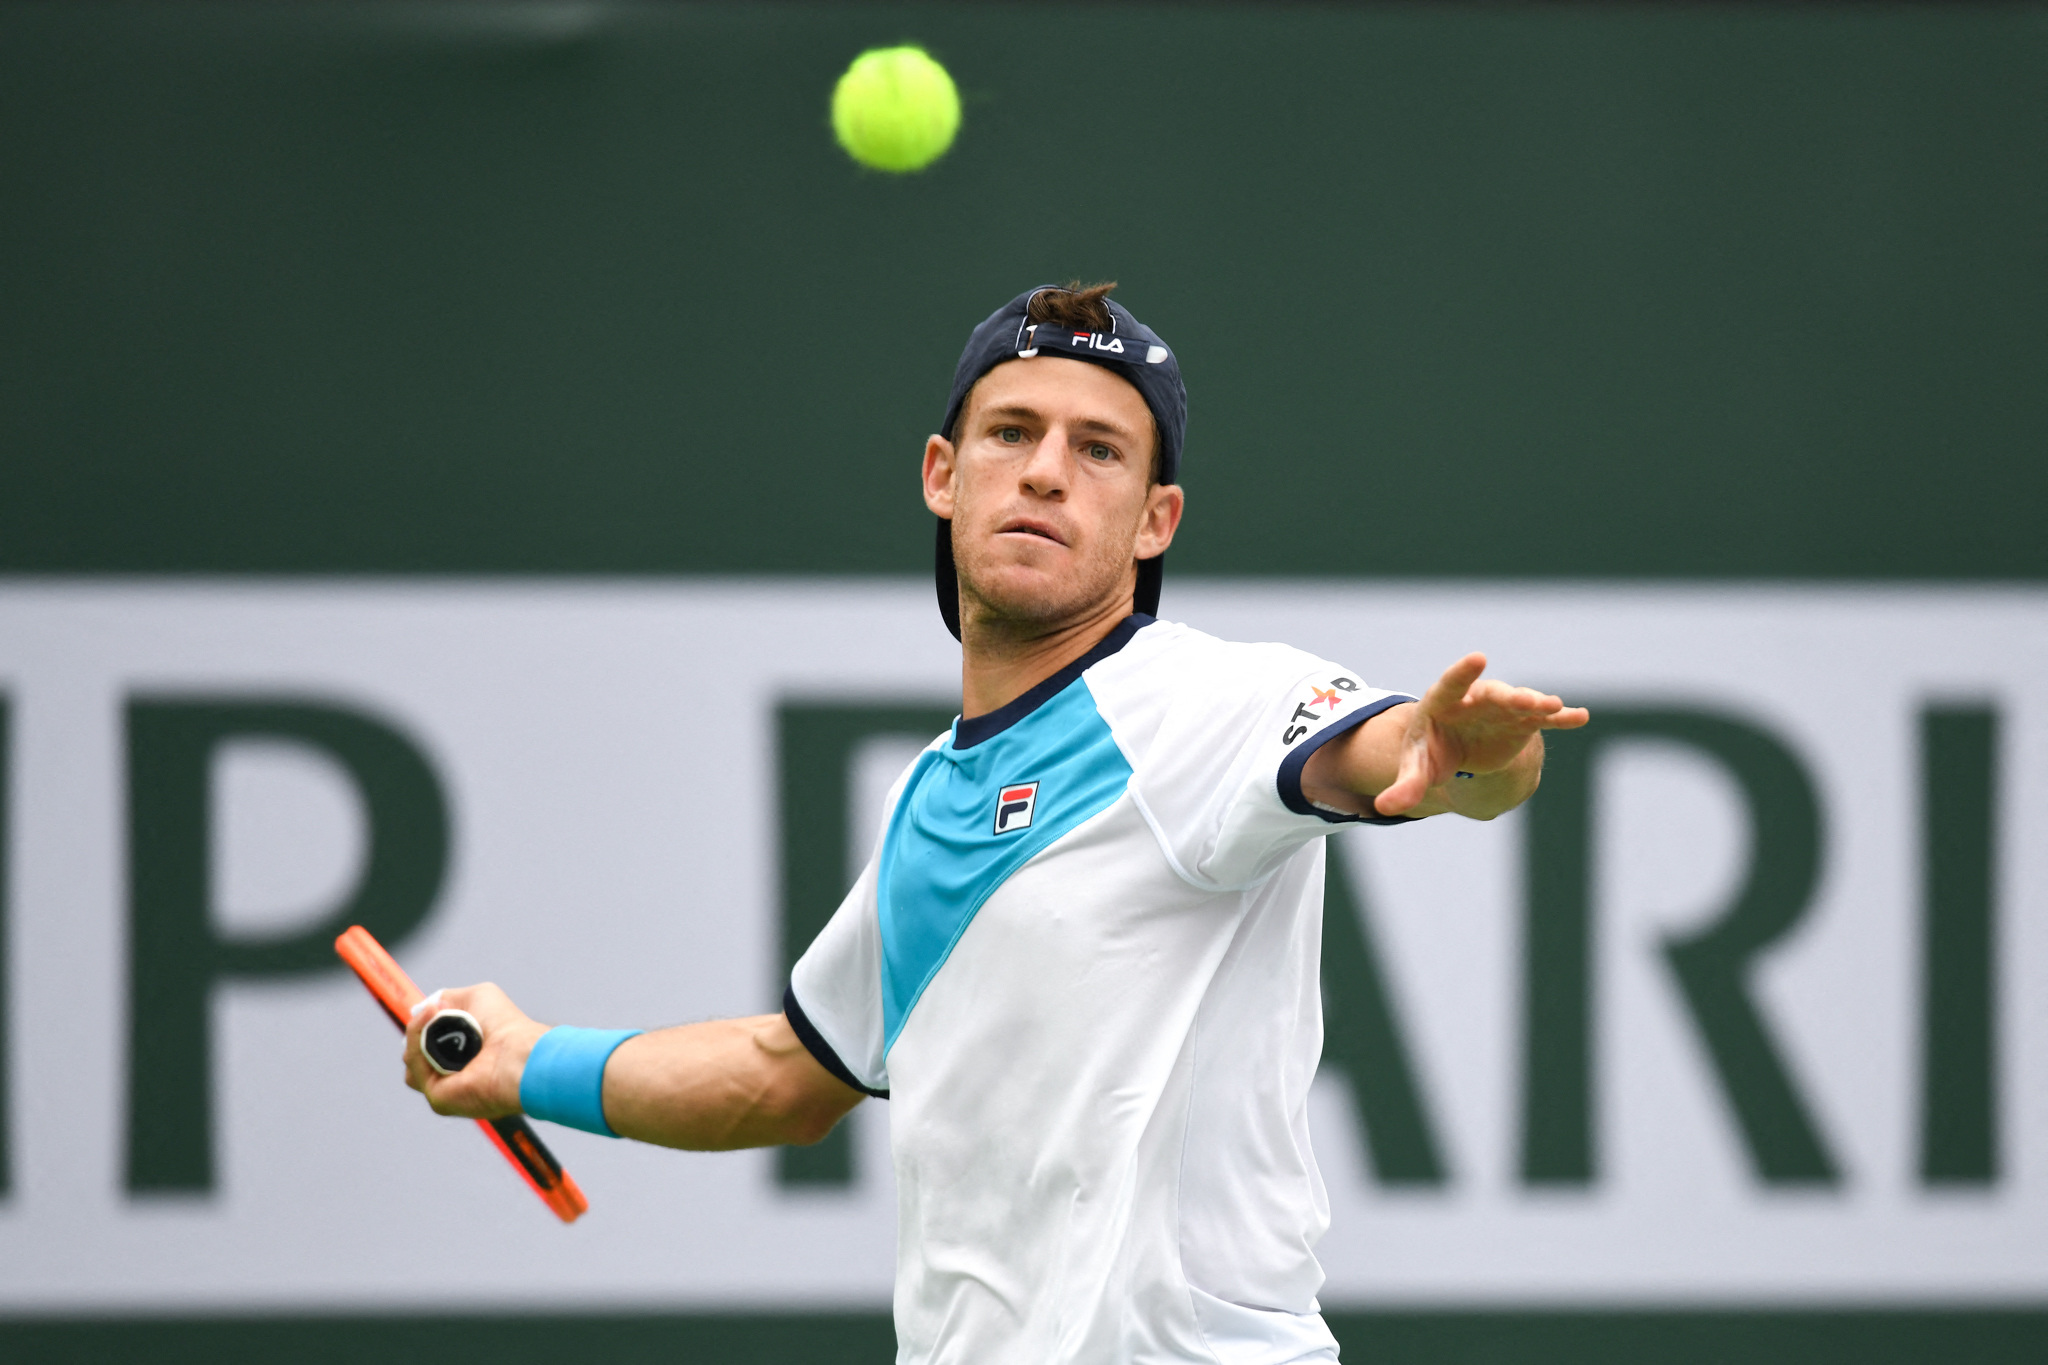 Mar 10, 2023; Indian Wells, CA, USA; Diego Schwartzman (ARG) hits a forehand during his 2nd round match against  Casper RUUD (NOR) (not pictured) during the BNP Paribas Open at Indian Wells Tennis Garden. Mandatory Credit: Jonathan Hui-USA TODAY Sports